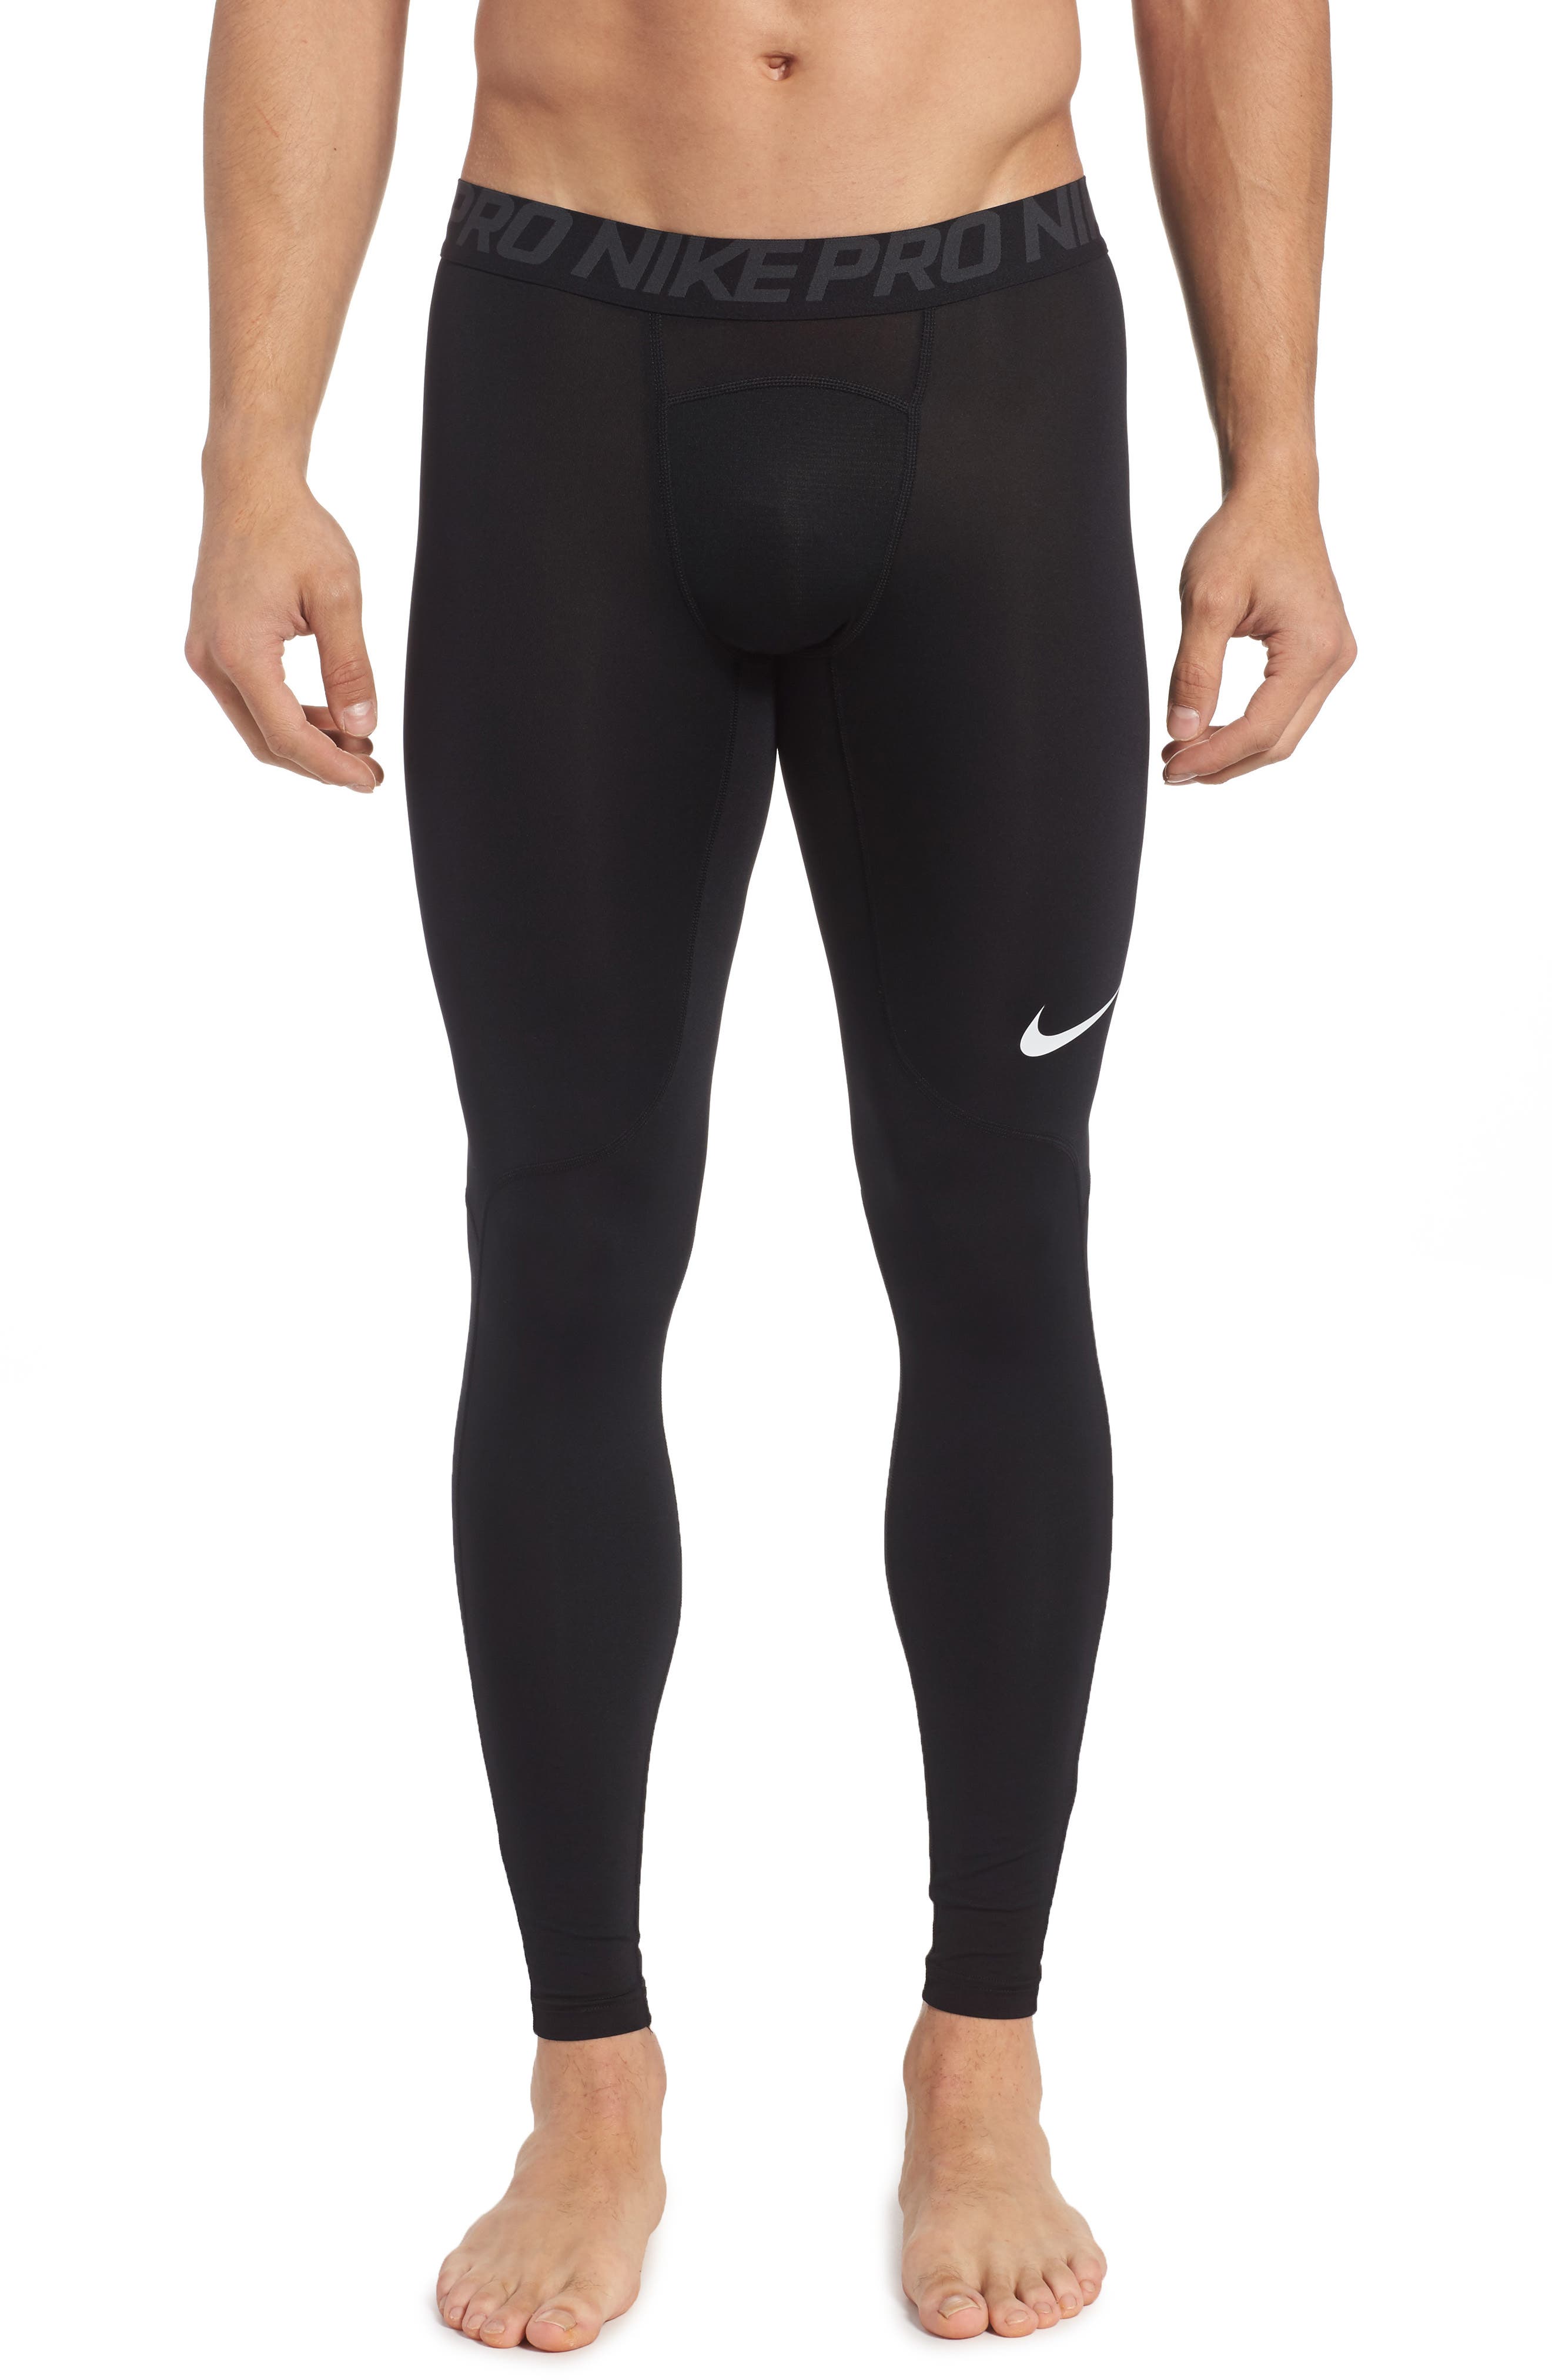 nike pro athletic tights 